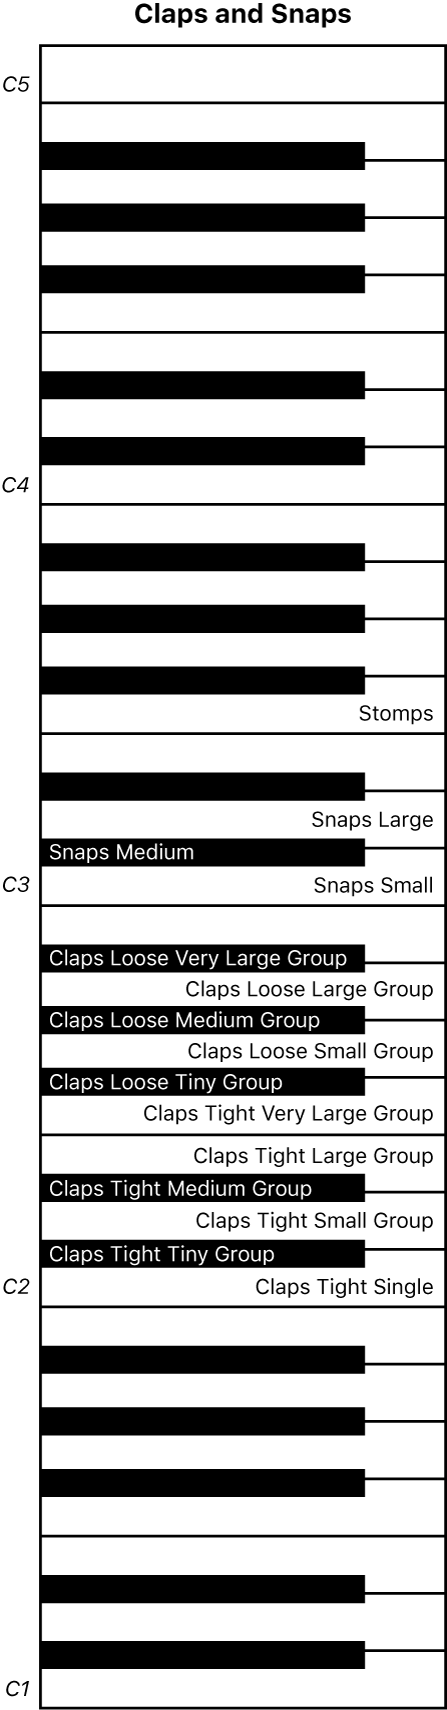 Figure. Claps and Snaps performance keyboard map.